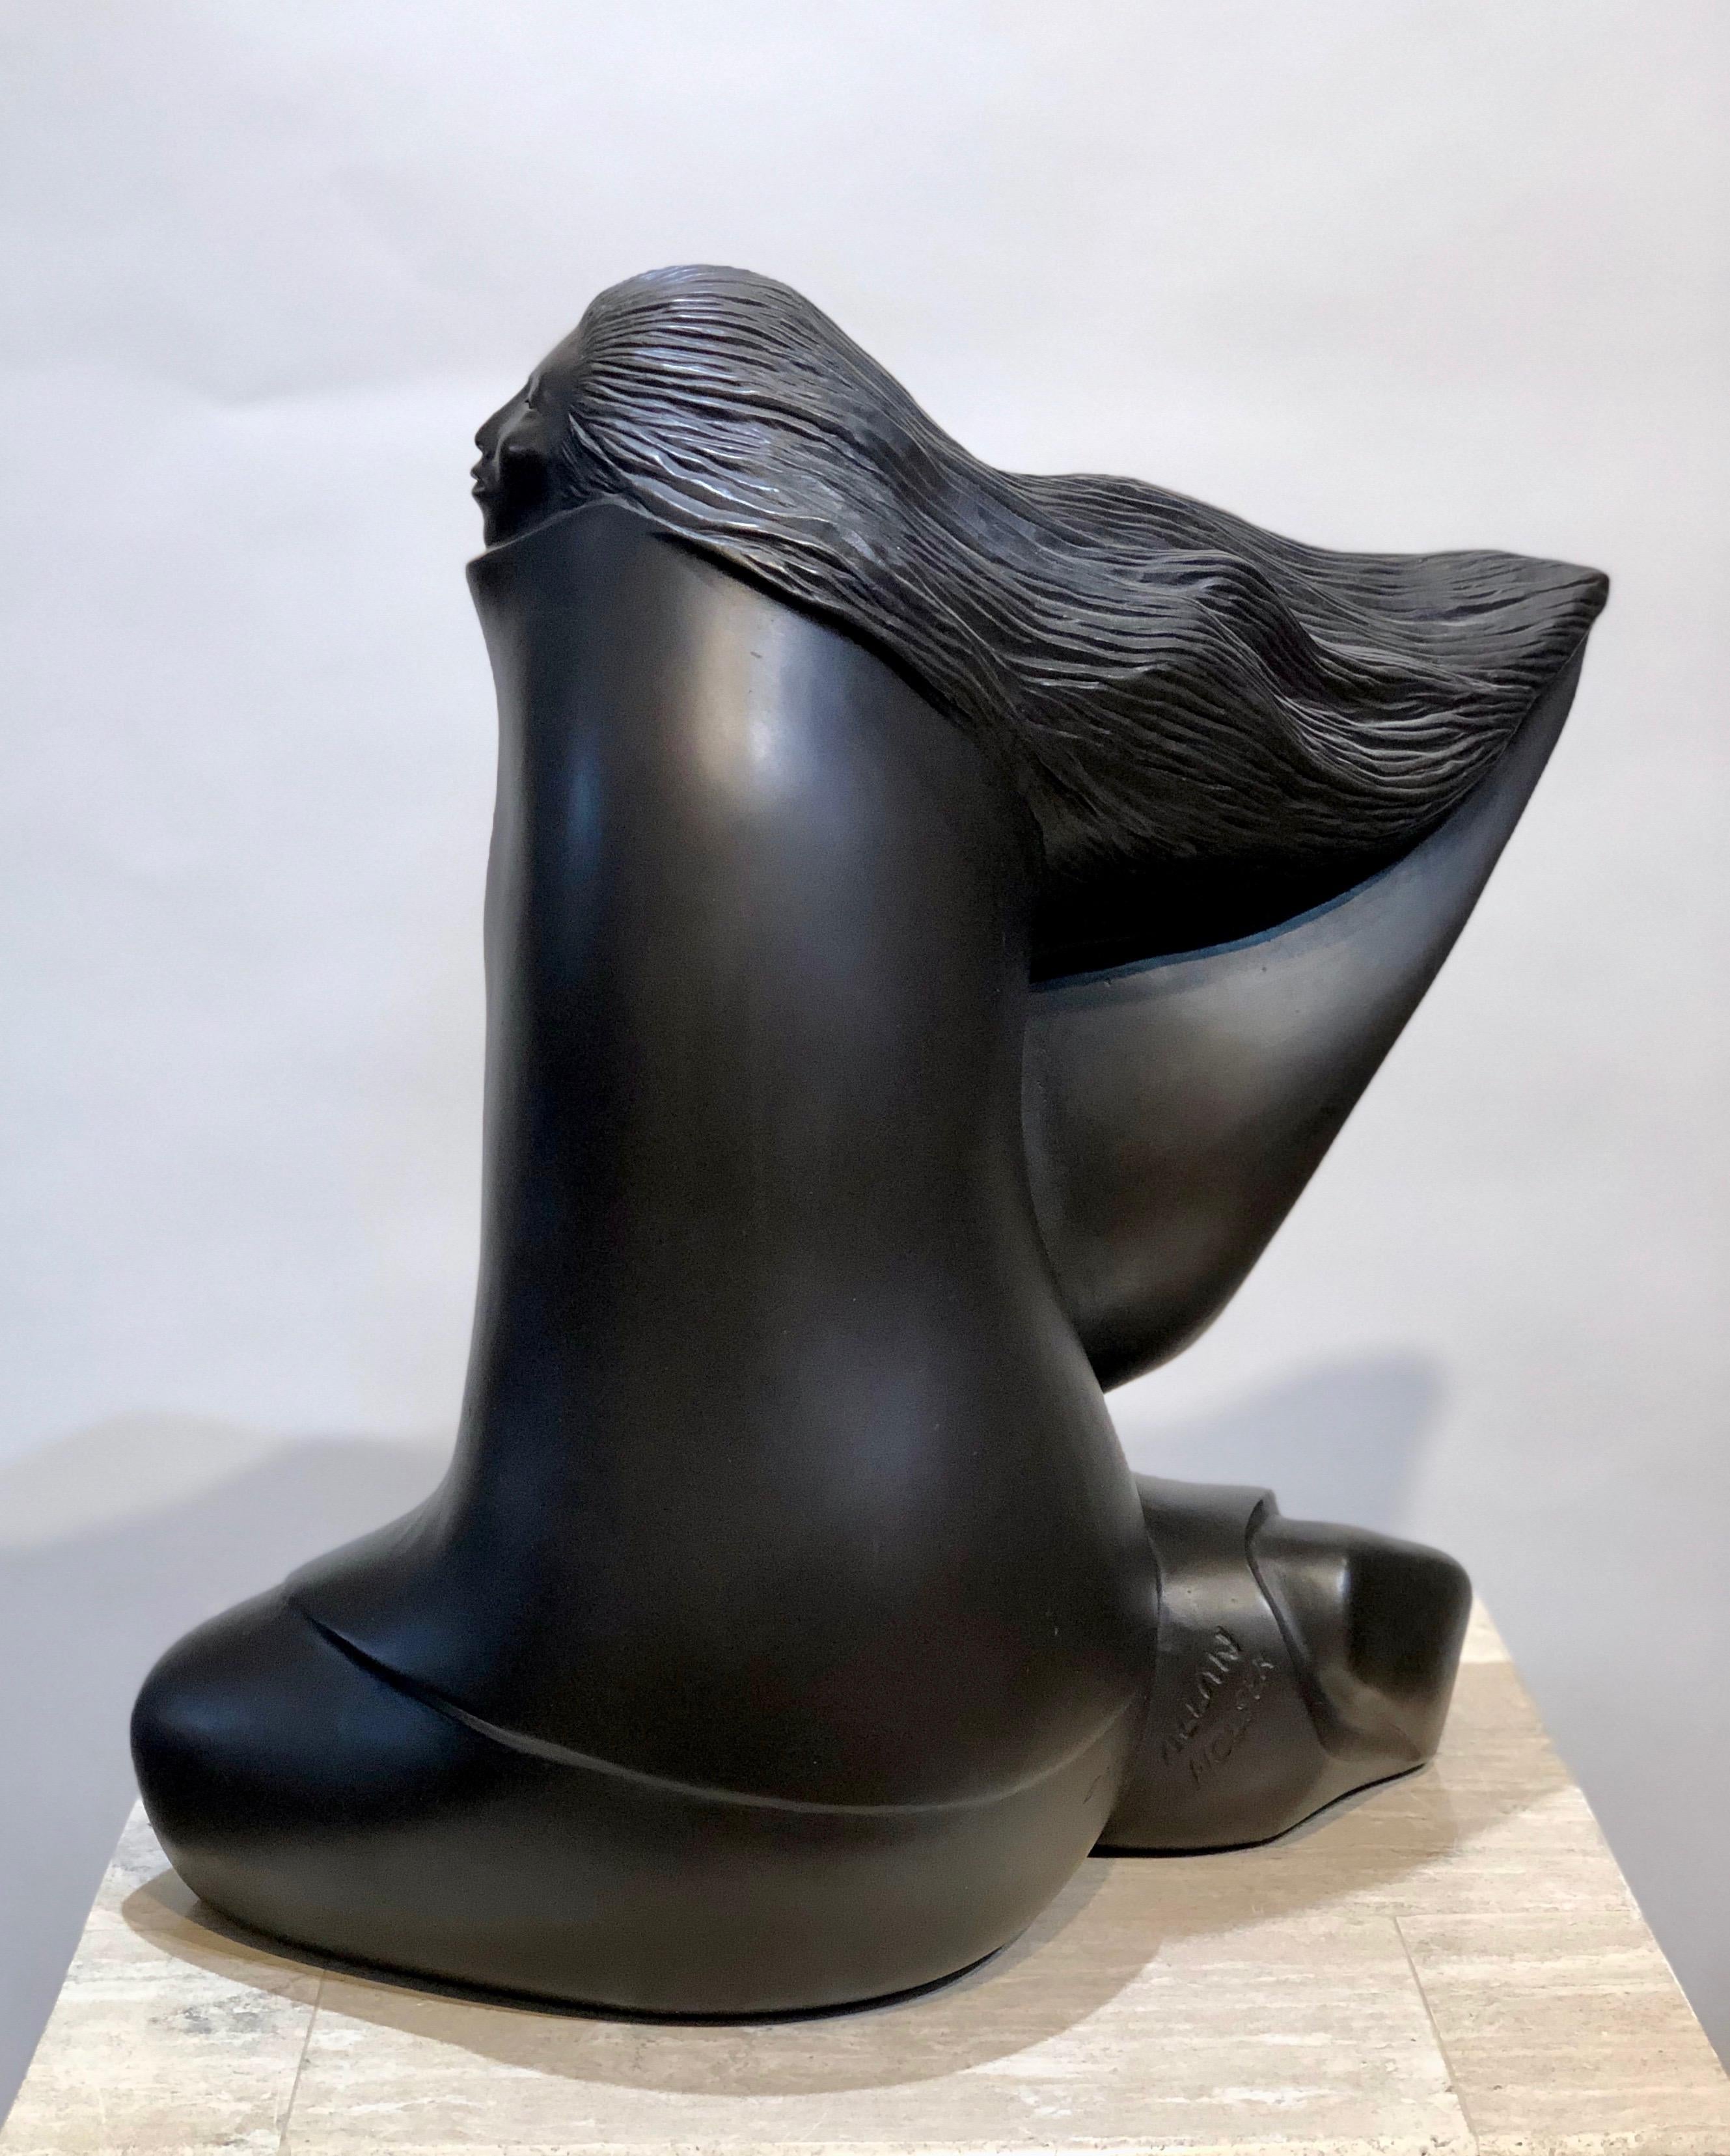 Thinking of Him, Allan Houser brown bronze sculpture, seated woman flowing hair   5